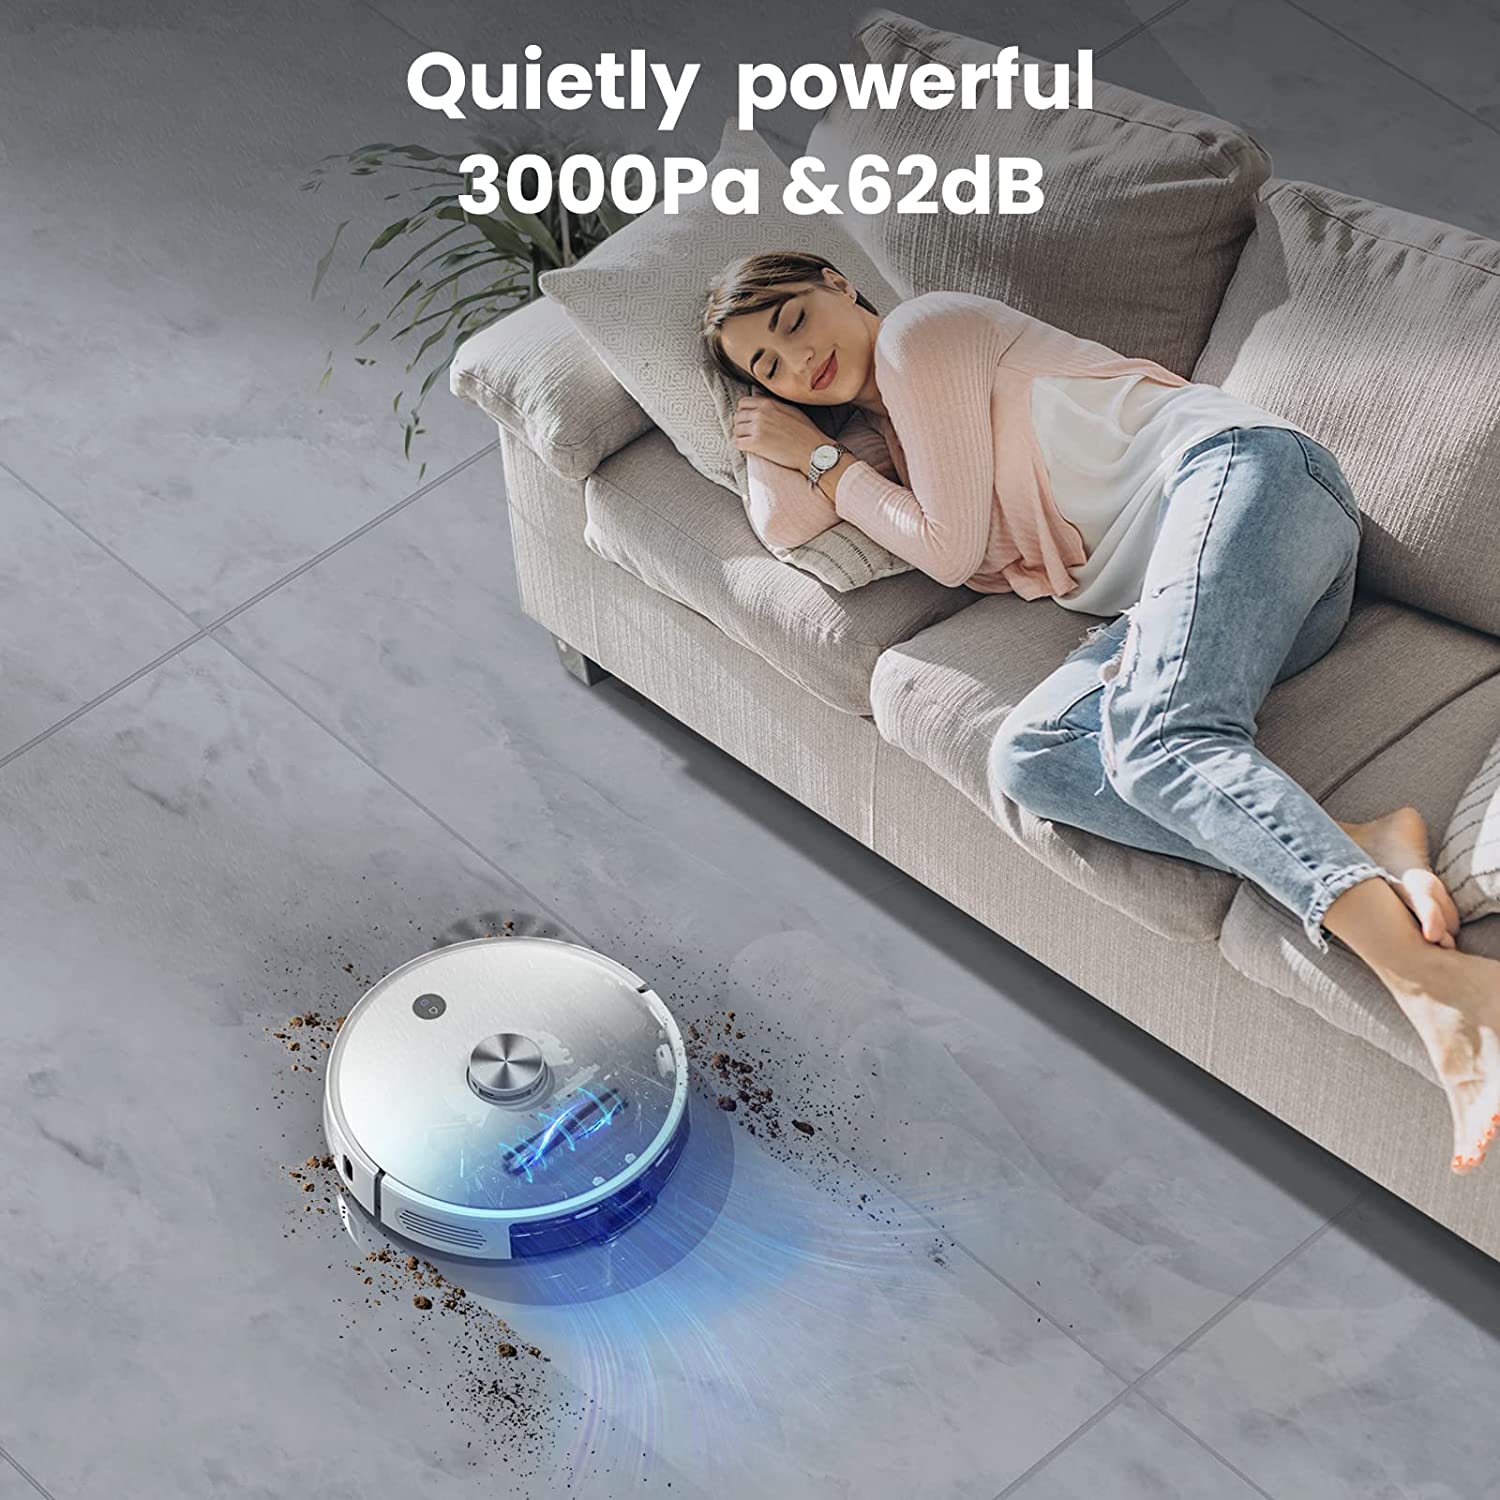  HONITURE Robot Vacuum Cleaner, G20 Robot Vacuum and Mop Combo  3 in 1, 4000pa Strong Suction, Self-Charging, App&Remote&Voice Control,  Compatible with Alexa, Ideal for Carpet, Hard Floor, Pet Hair.